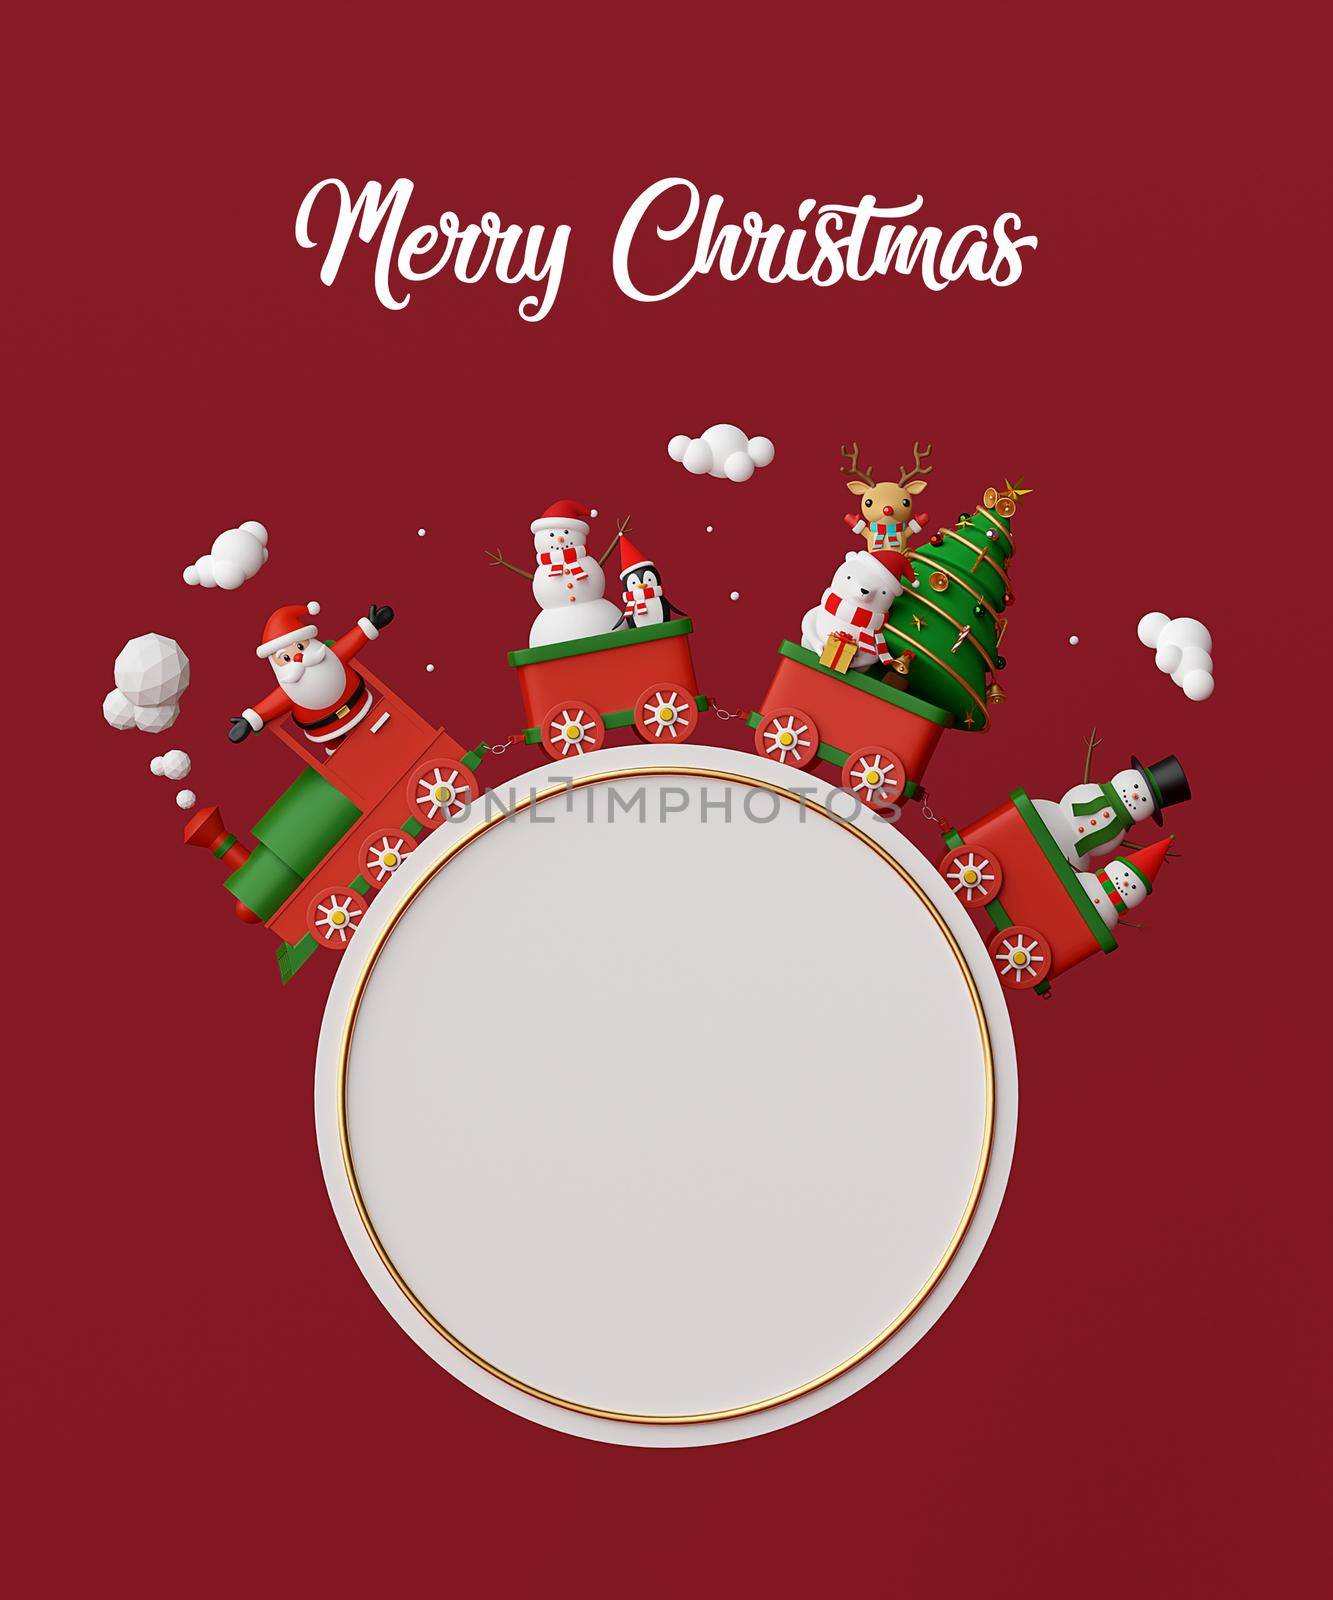 Merry Christmas and Happy New Year, Santa Claus and friends on Christmas train, 3d rendering